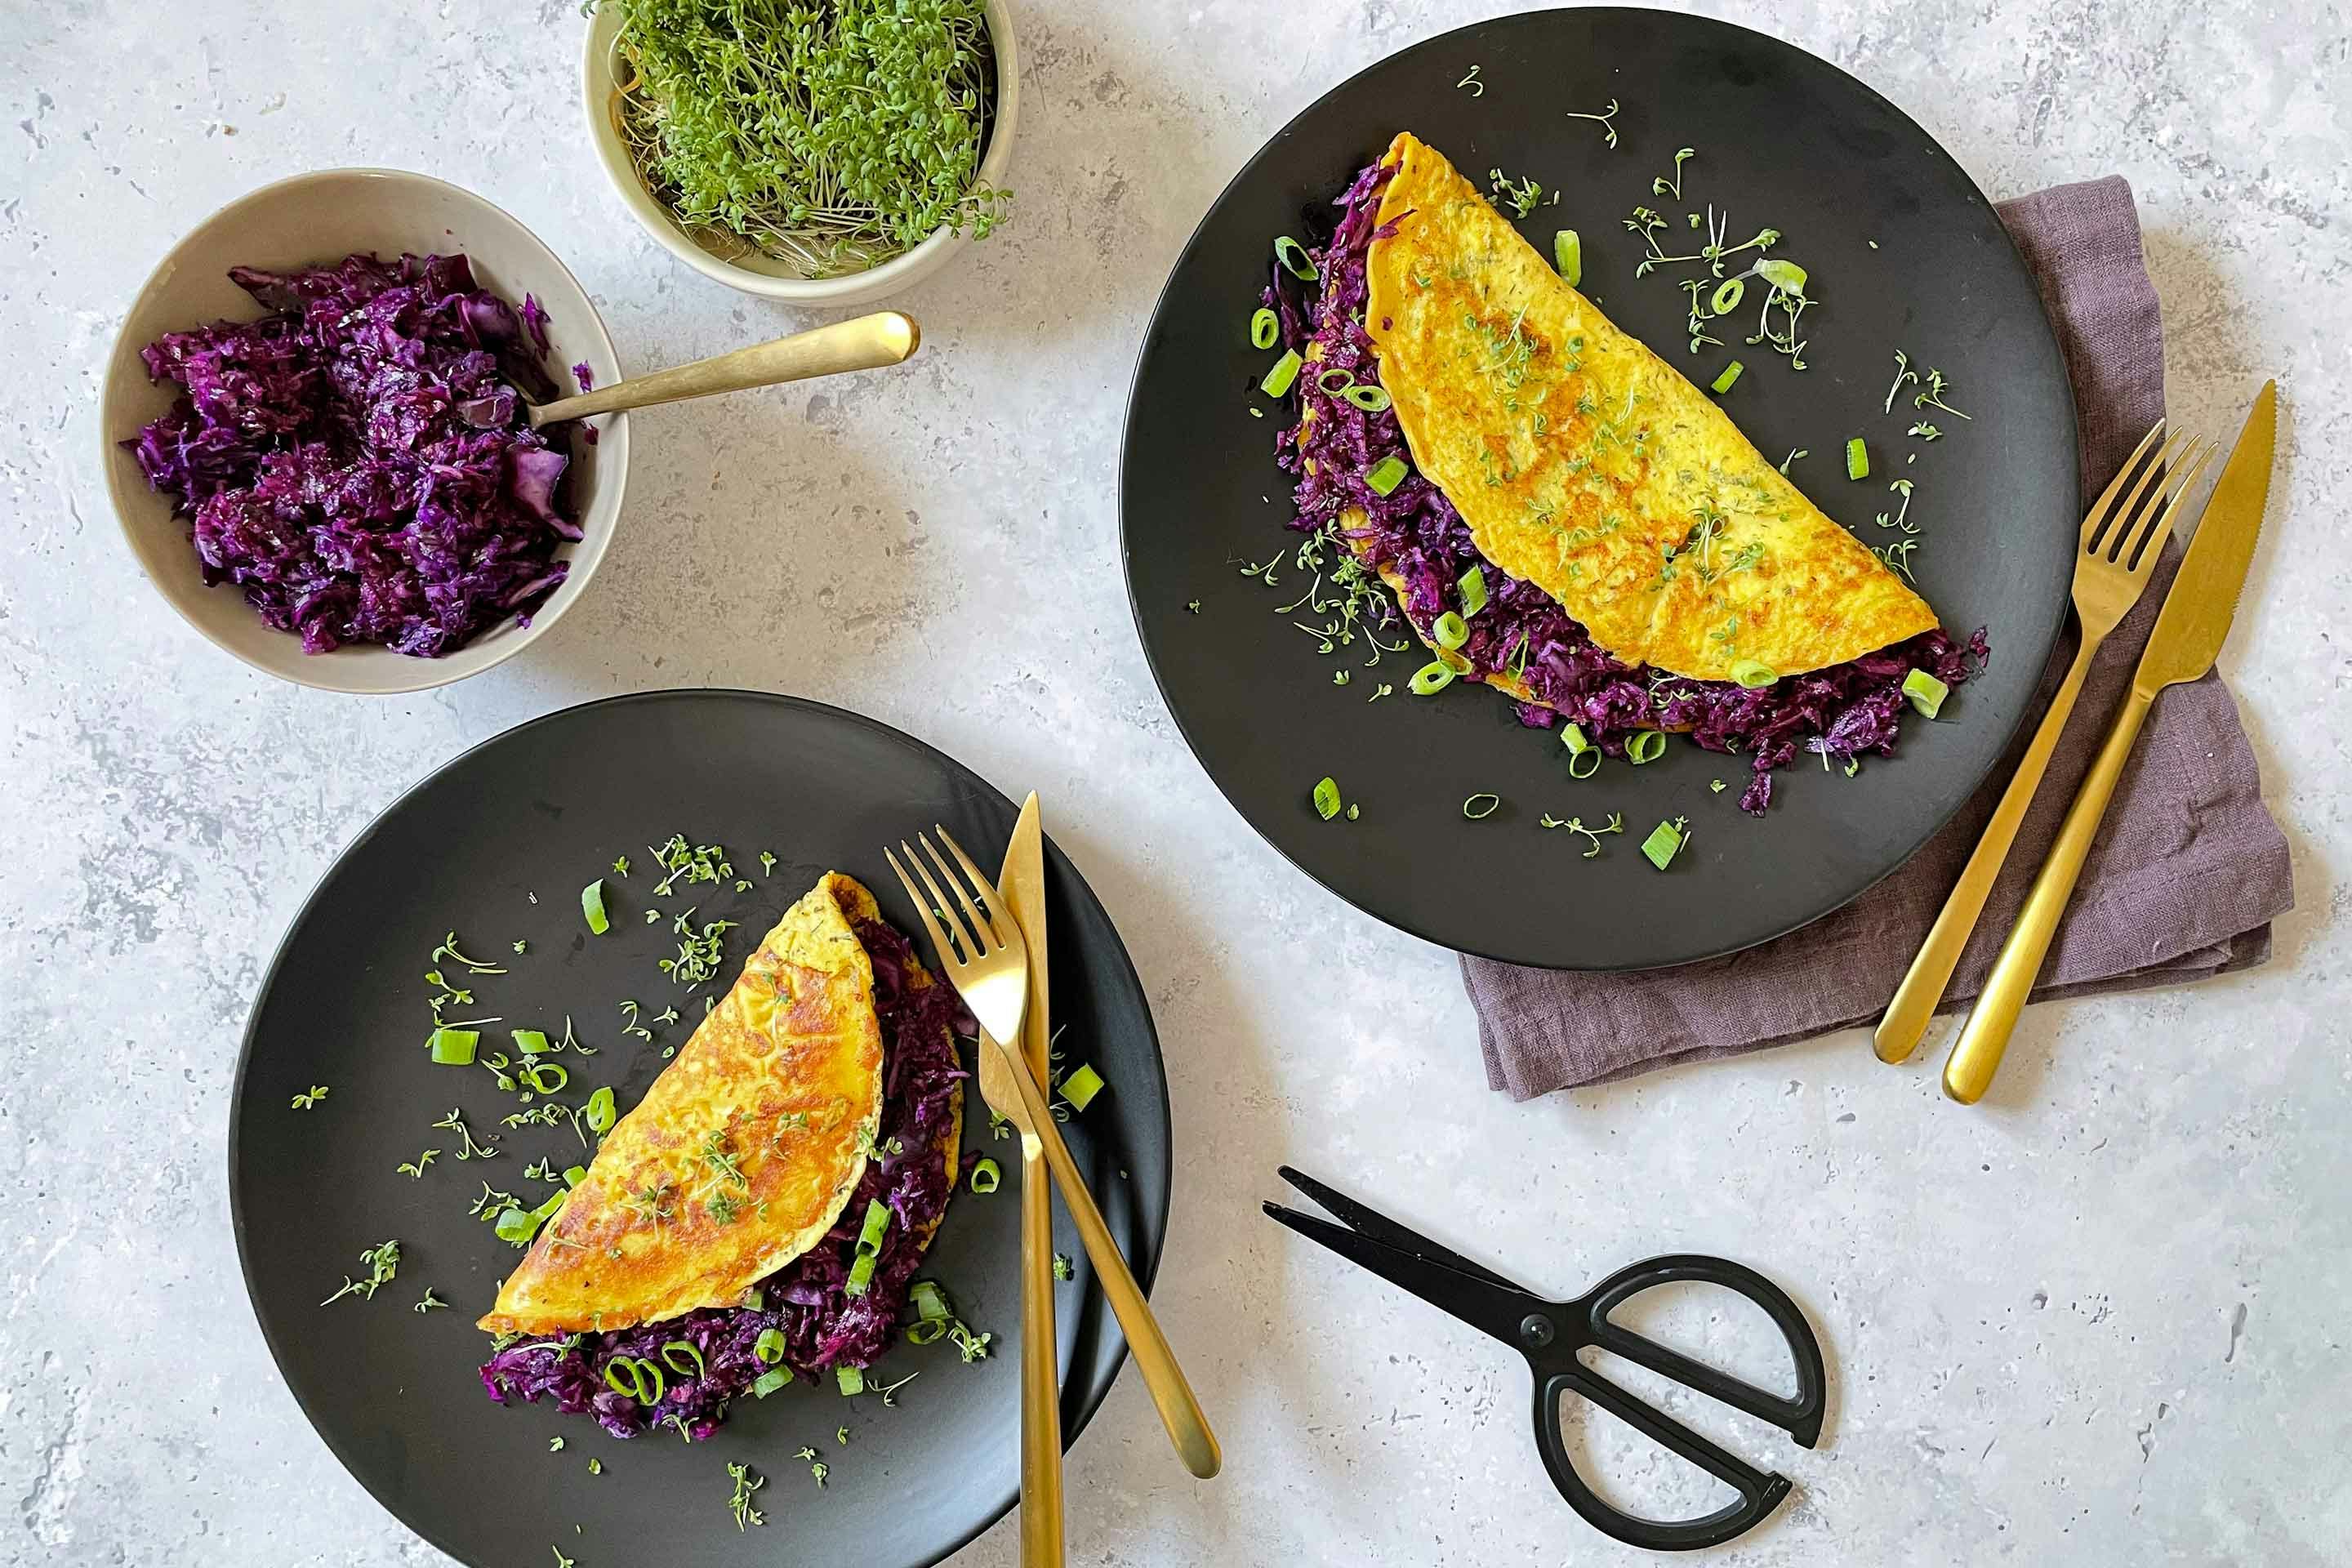 Herb omelet filled with crunchy red cabbage, garnished with cress.